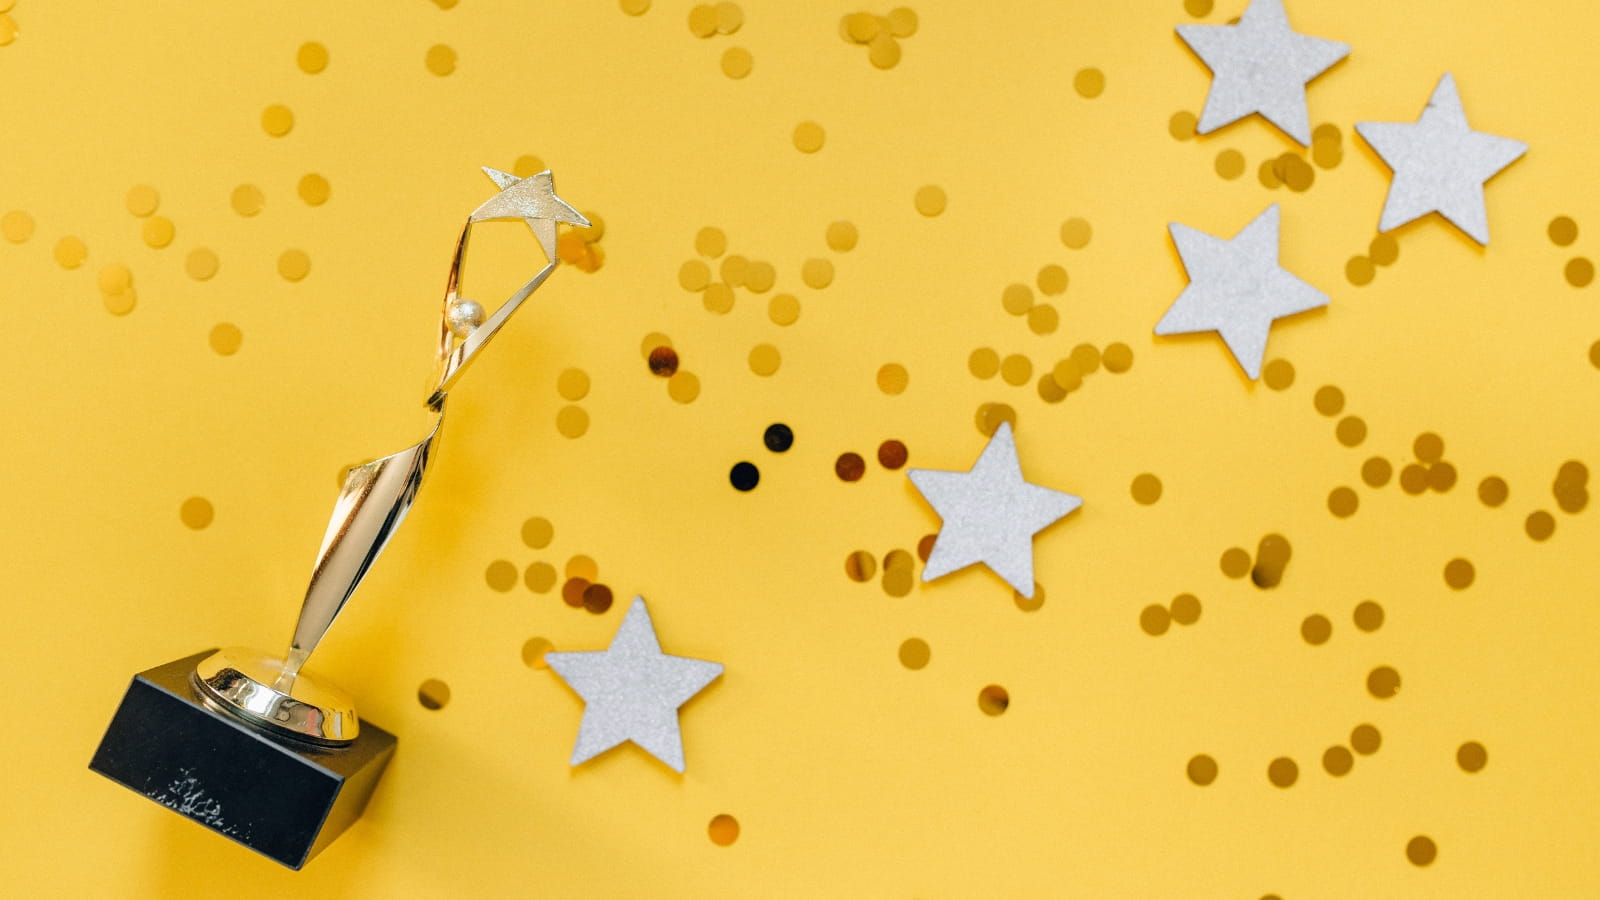 A golden award of a person holding up a star sits on a yellow surface surrounded by confetti